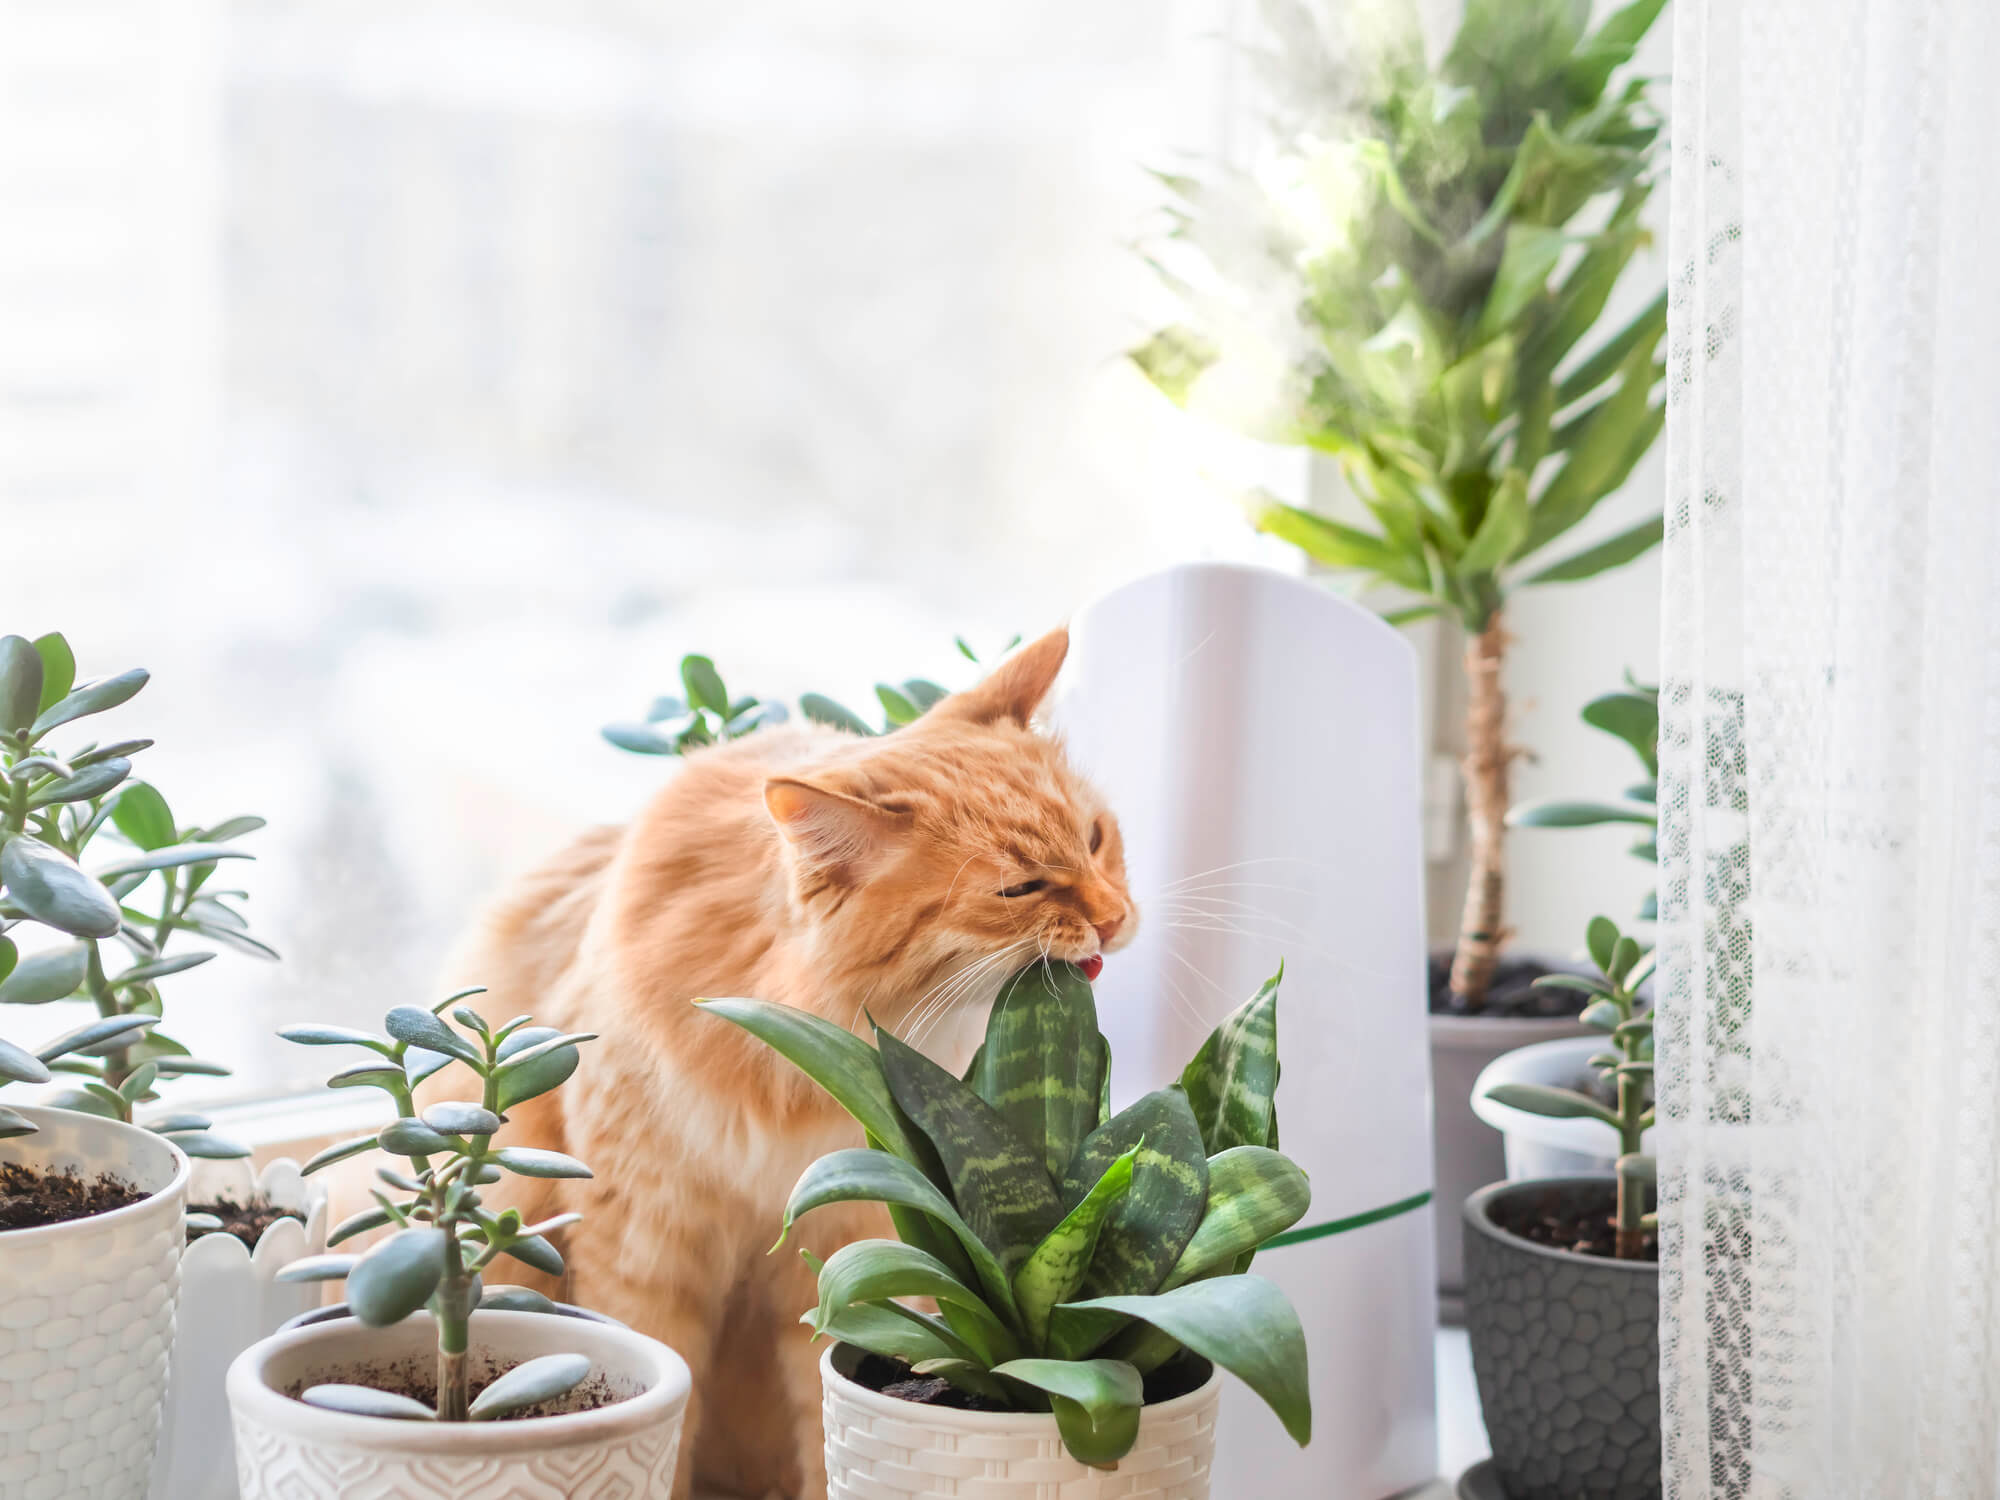 Many common houseplants and landscape plants are toxic to pets if ingested. If your pet gets ahold of something you think may be poisonous and begins exhibiting concerning symptoms, call your local veterinarian or the ASPCA Poison Control Center at 888-426-4435.